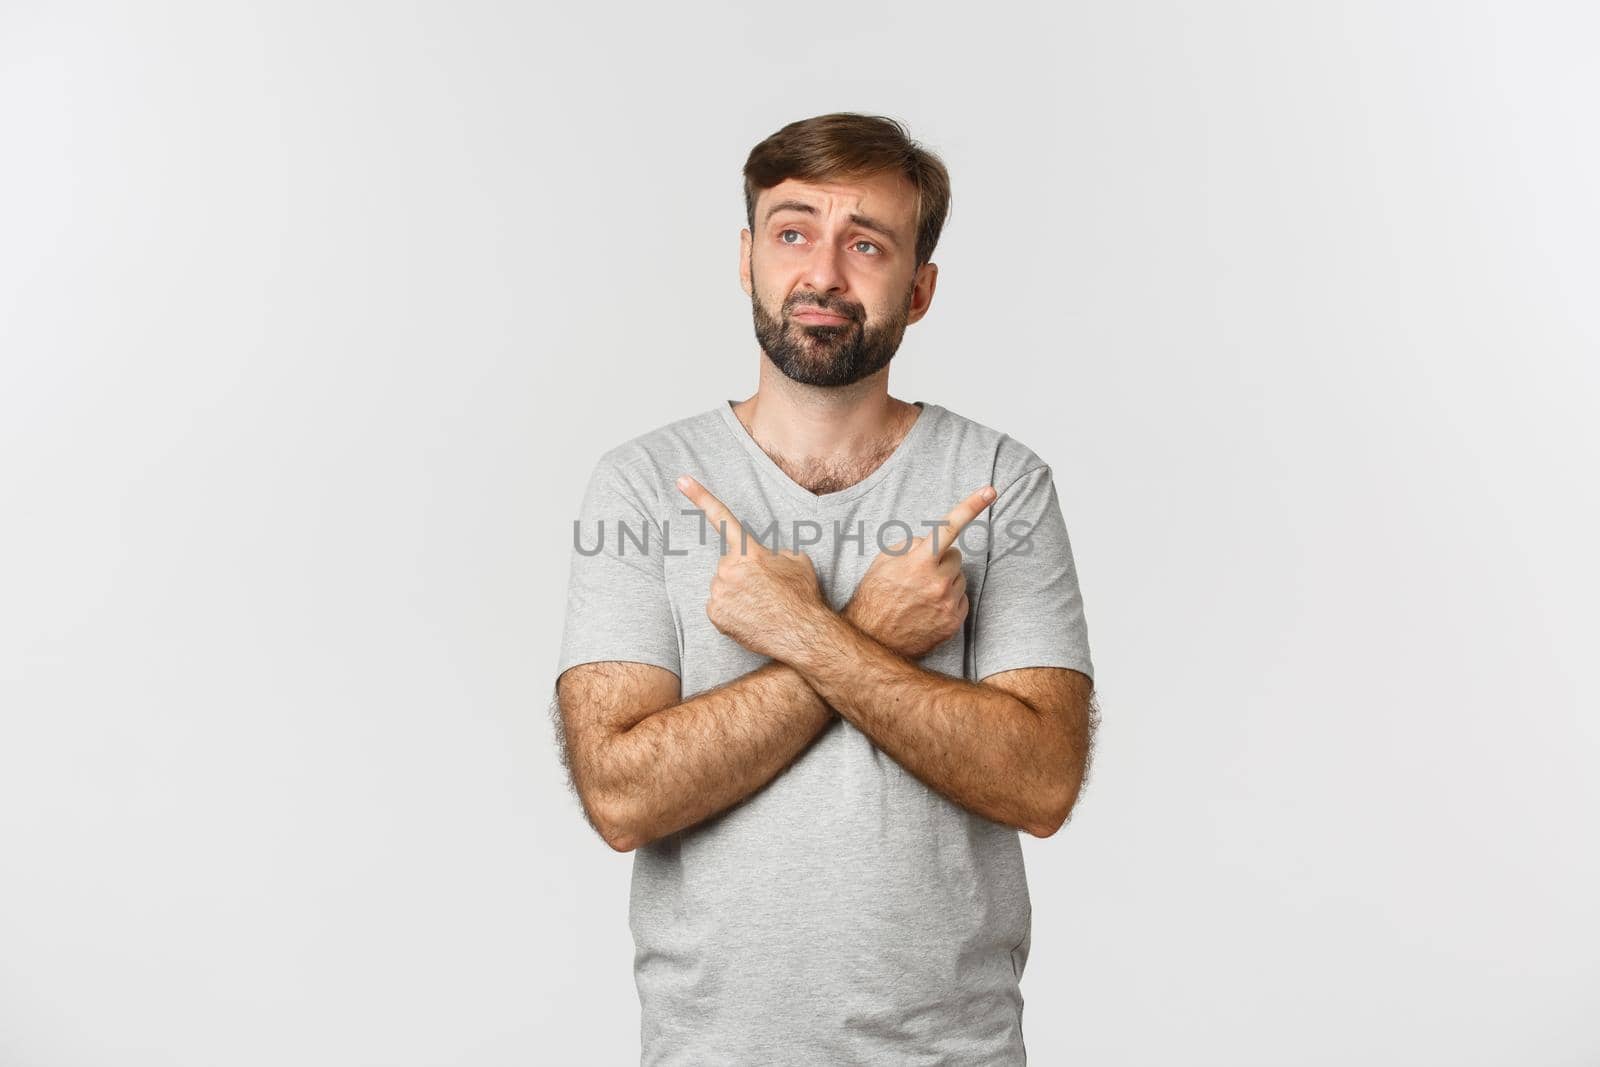 Portrait of indecisive beaded man in gray t-shirt, making decision, pointing fingers sideways at two choices, standing over white background.